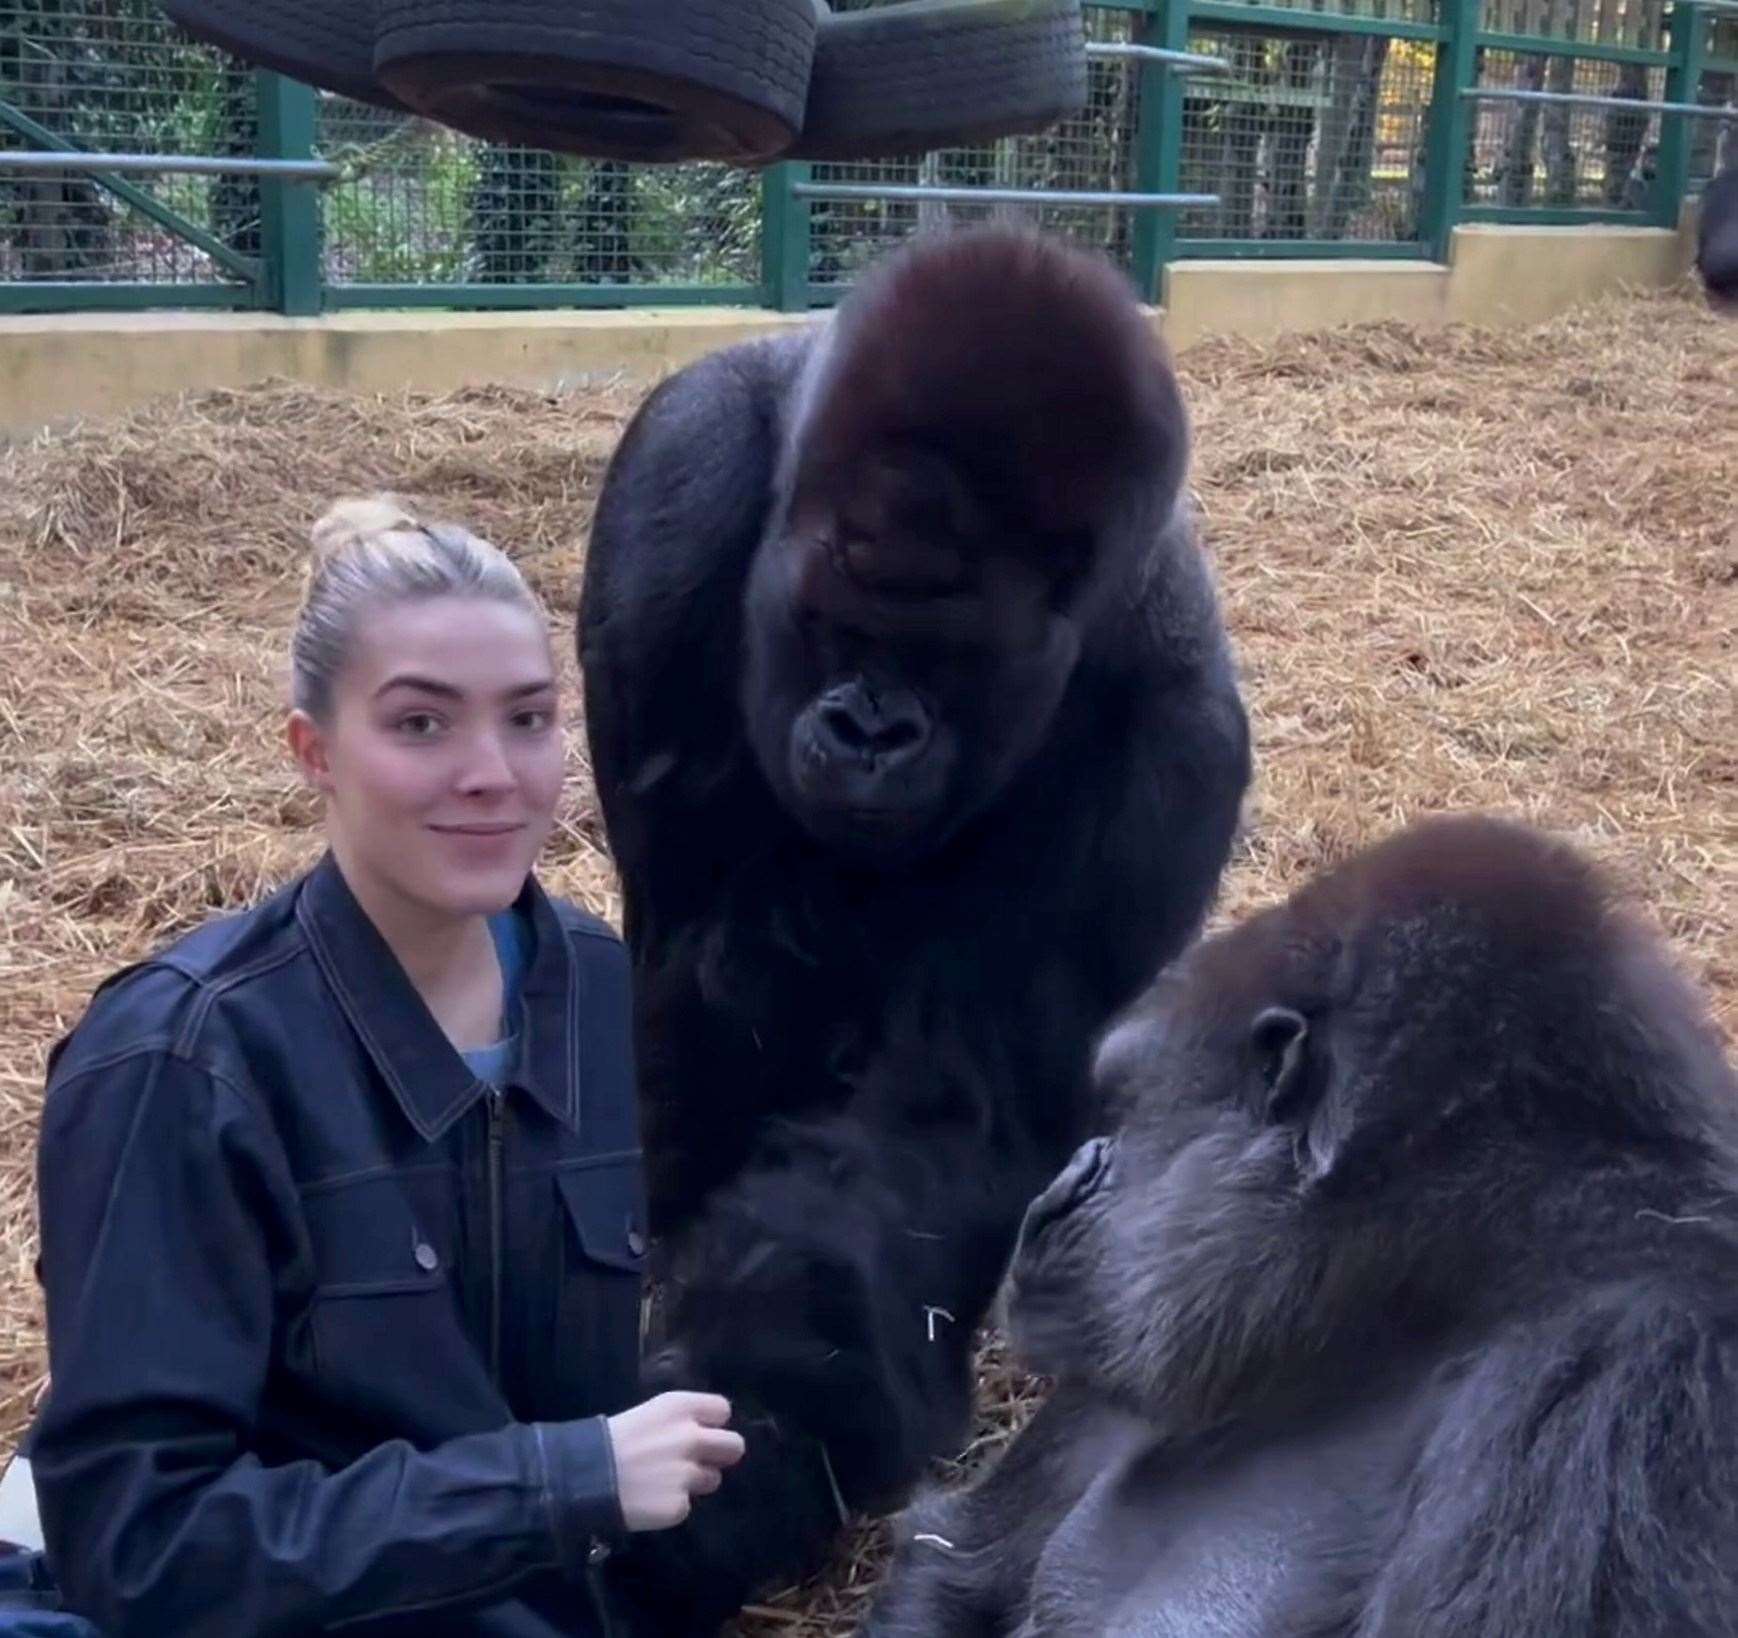 A touching moment between Freya Aspinall and the gorillas she has known all her life has been captured on camera. Picture: SWNS